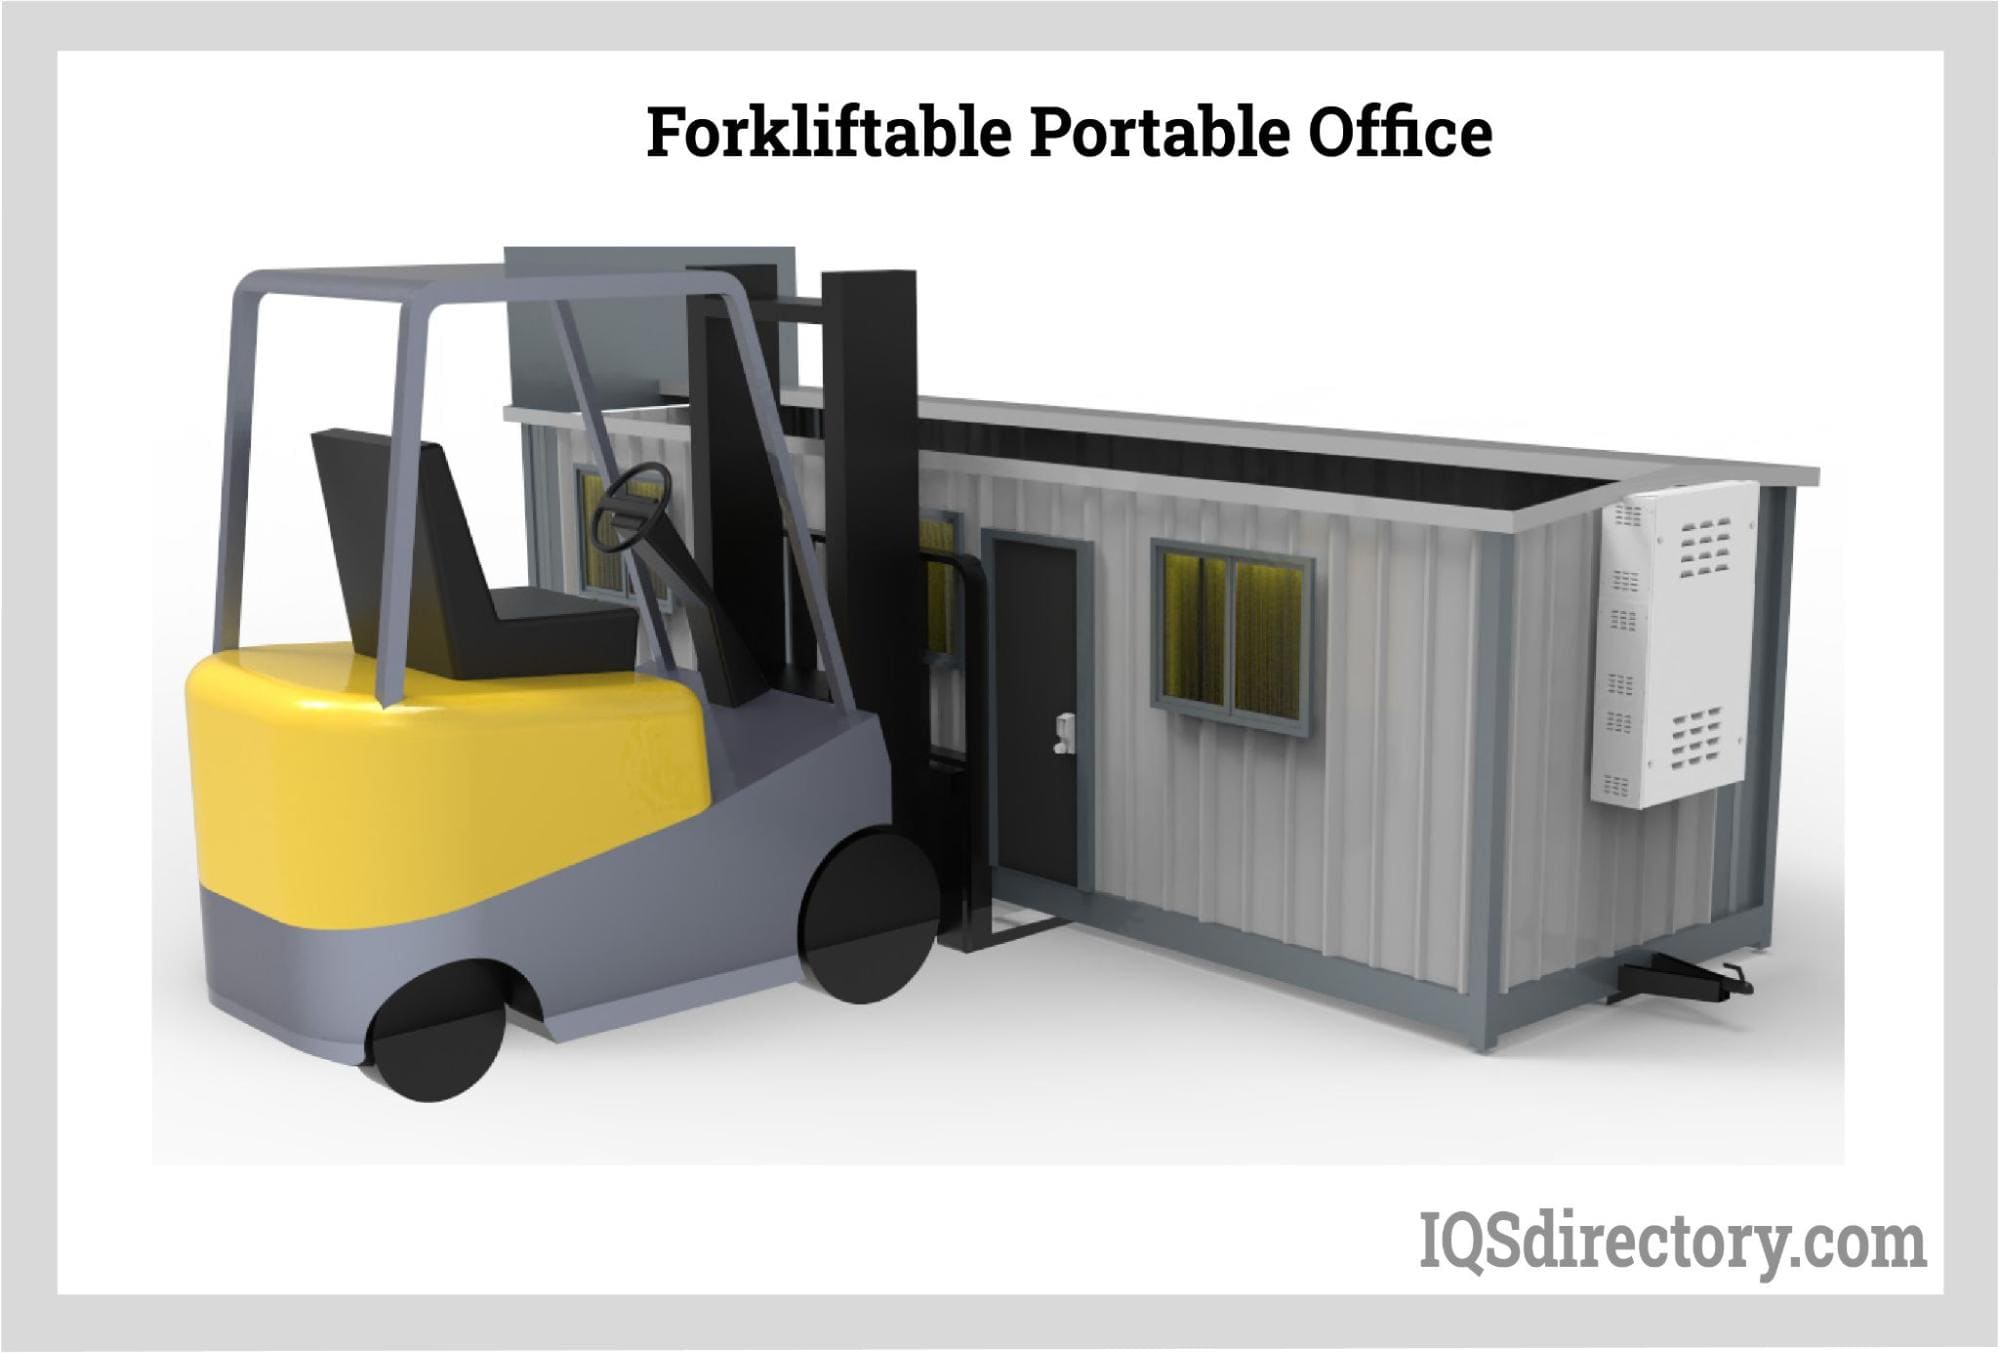 Forkliftable Portable Office